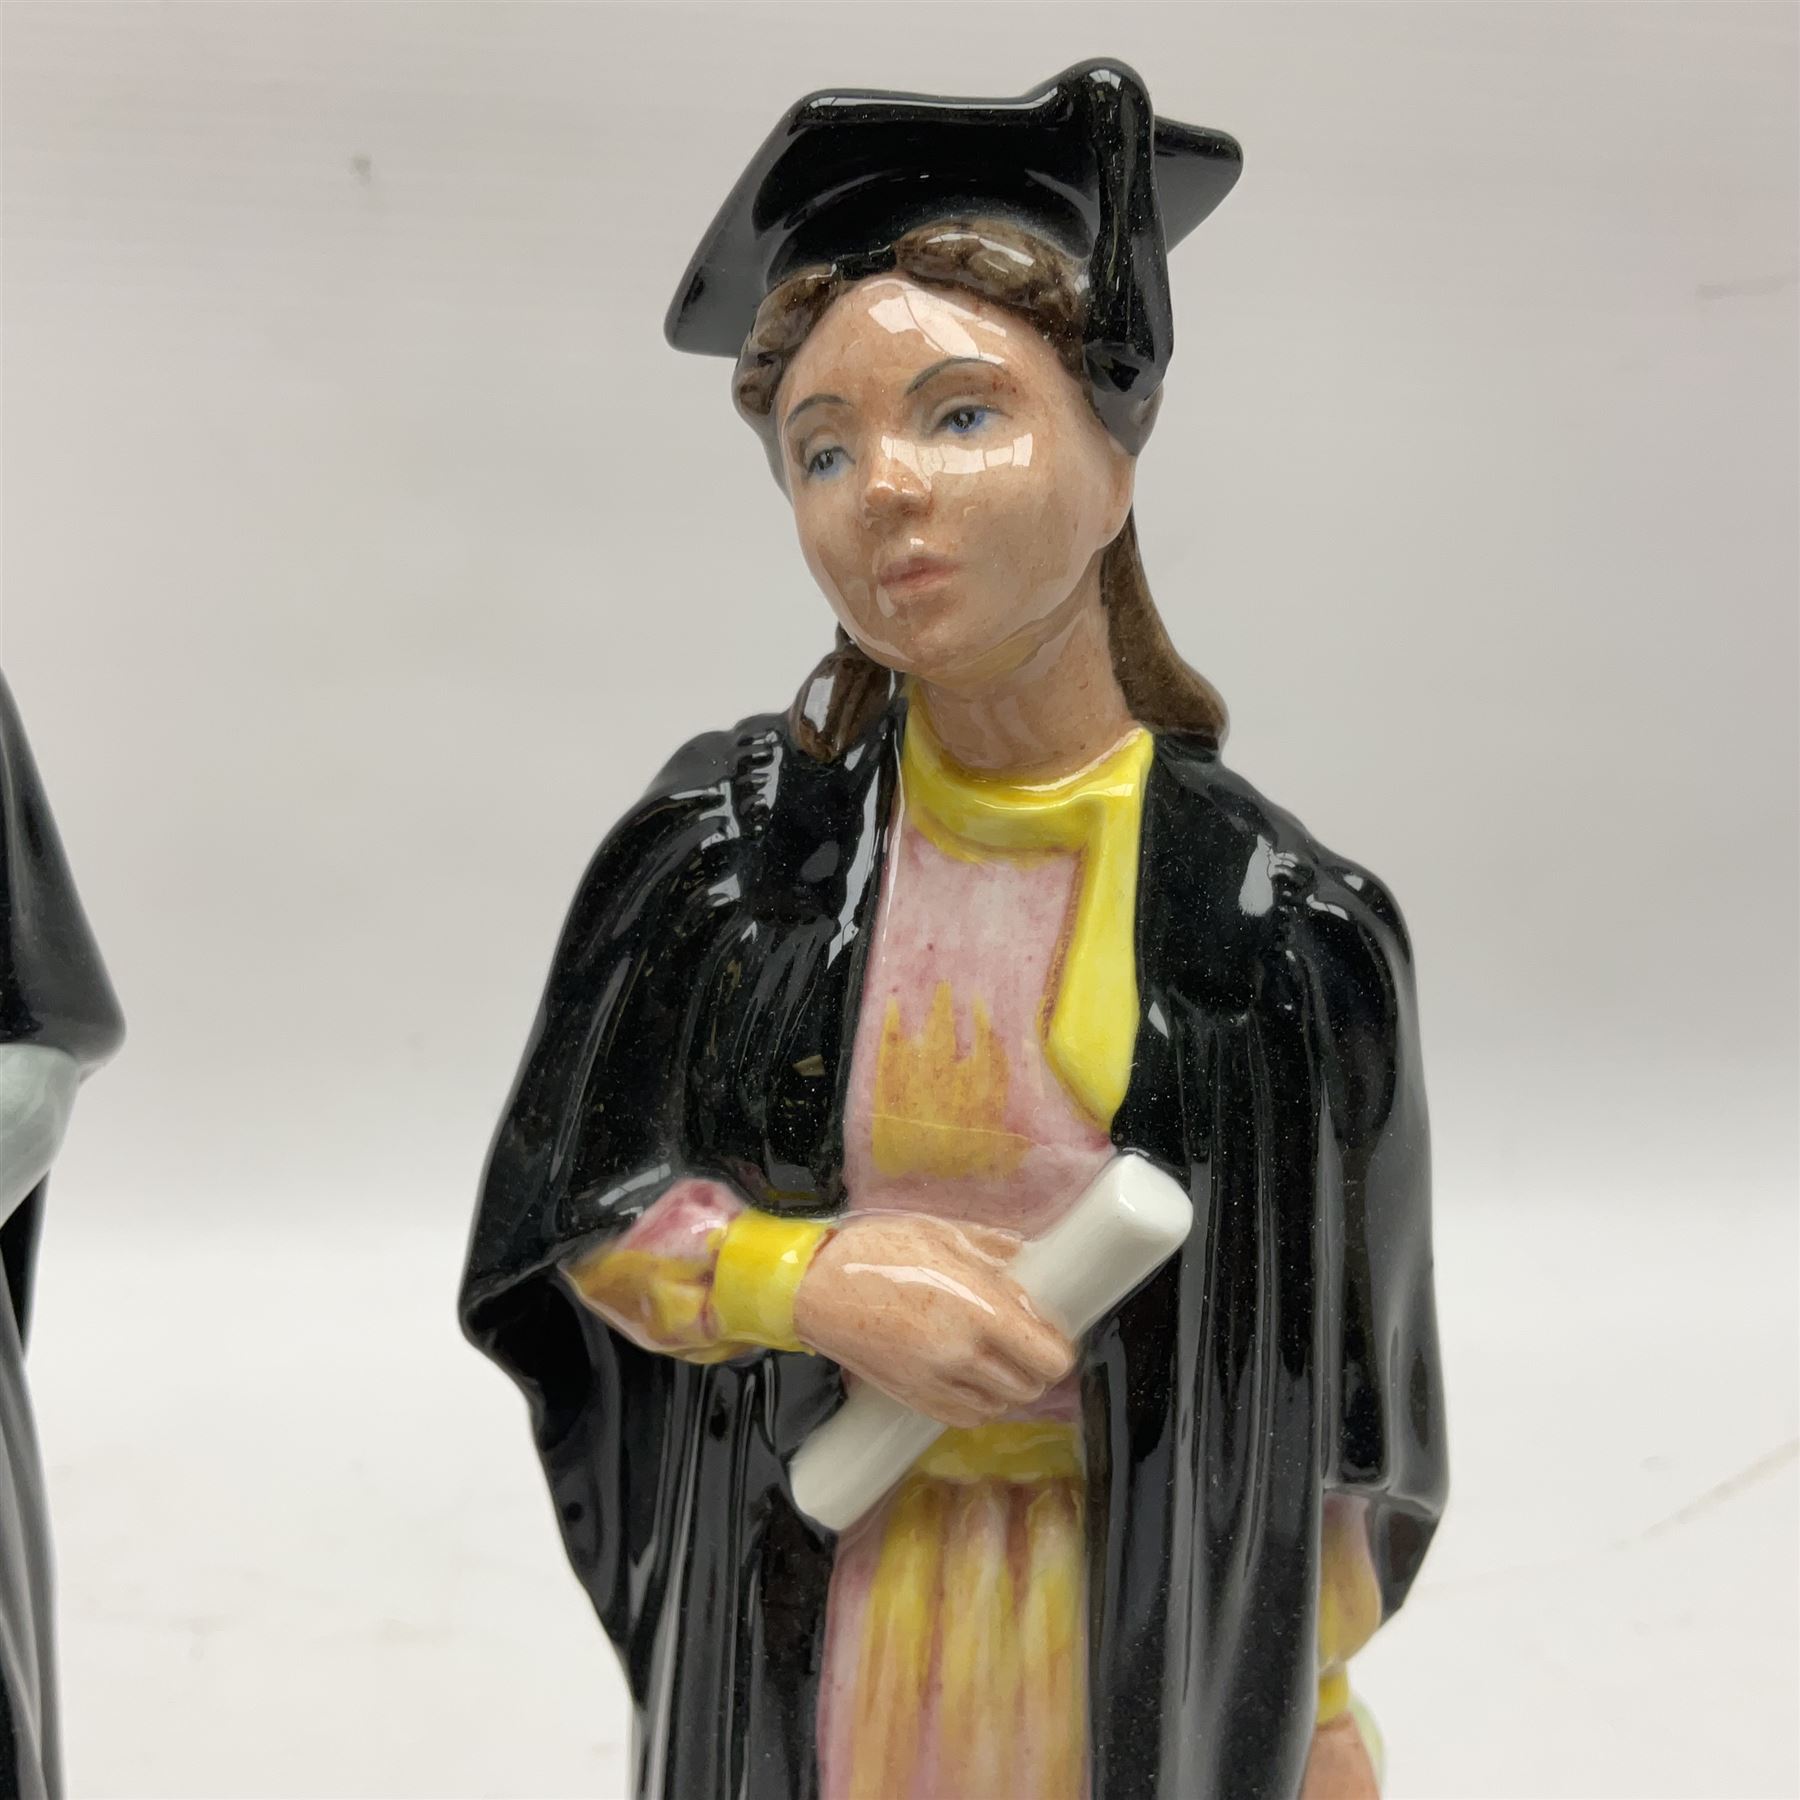 Pair of Royal Doulton figures of The Graduate - Image 5 of 9